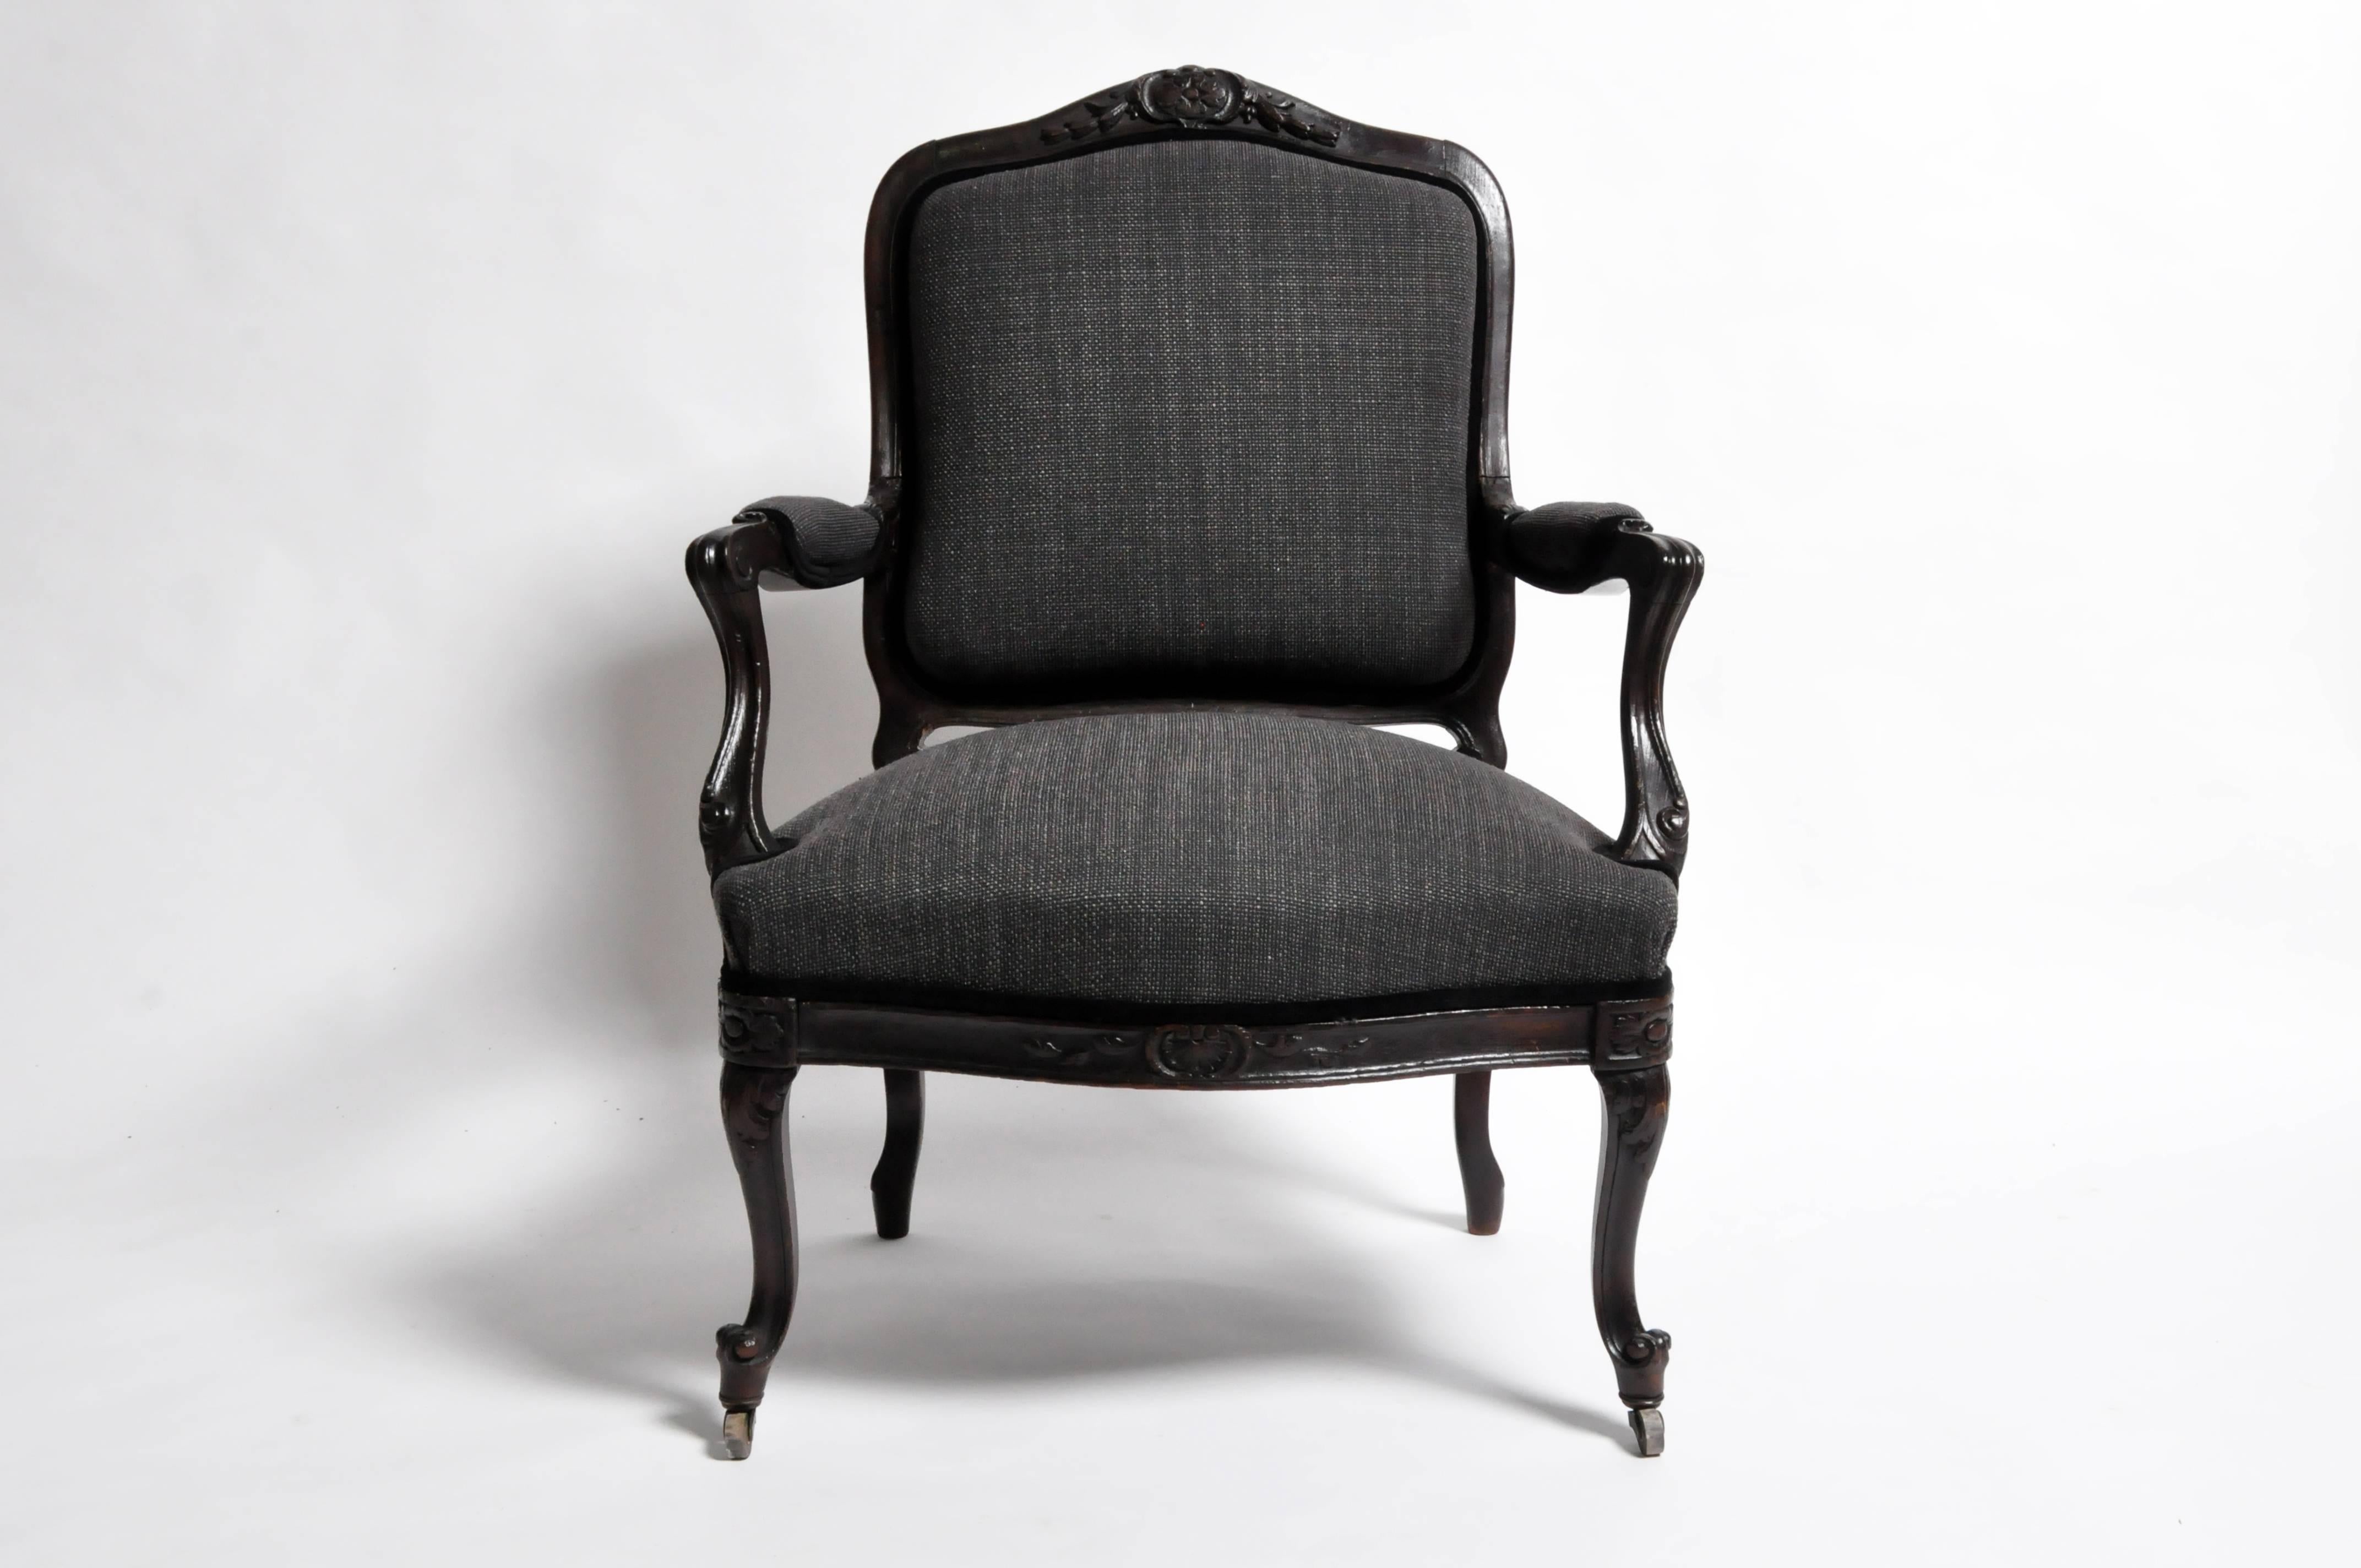 This handsome 19th Century set of four Louis XV style armchairs are from France and made from oak wood. They represents the perfect balance of old world sophistication and antique beauty. The chairs features a rich, dark wood frames, incised with